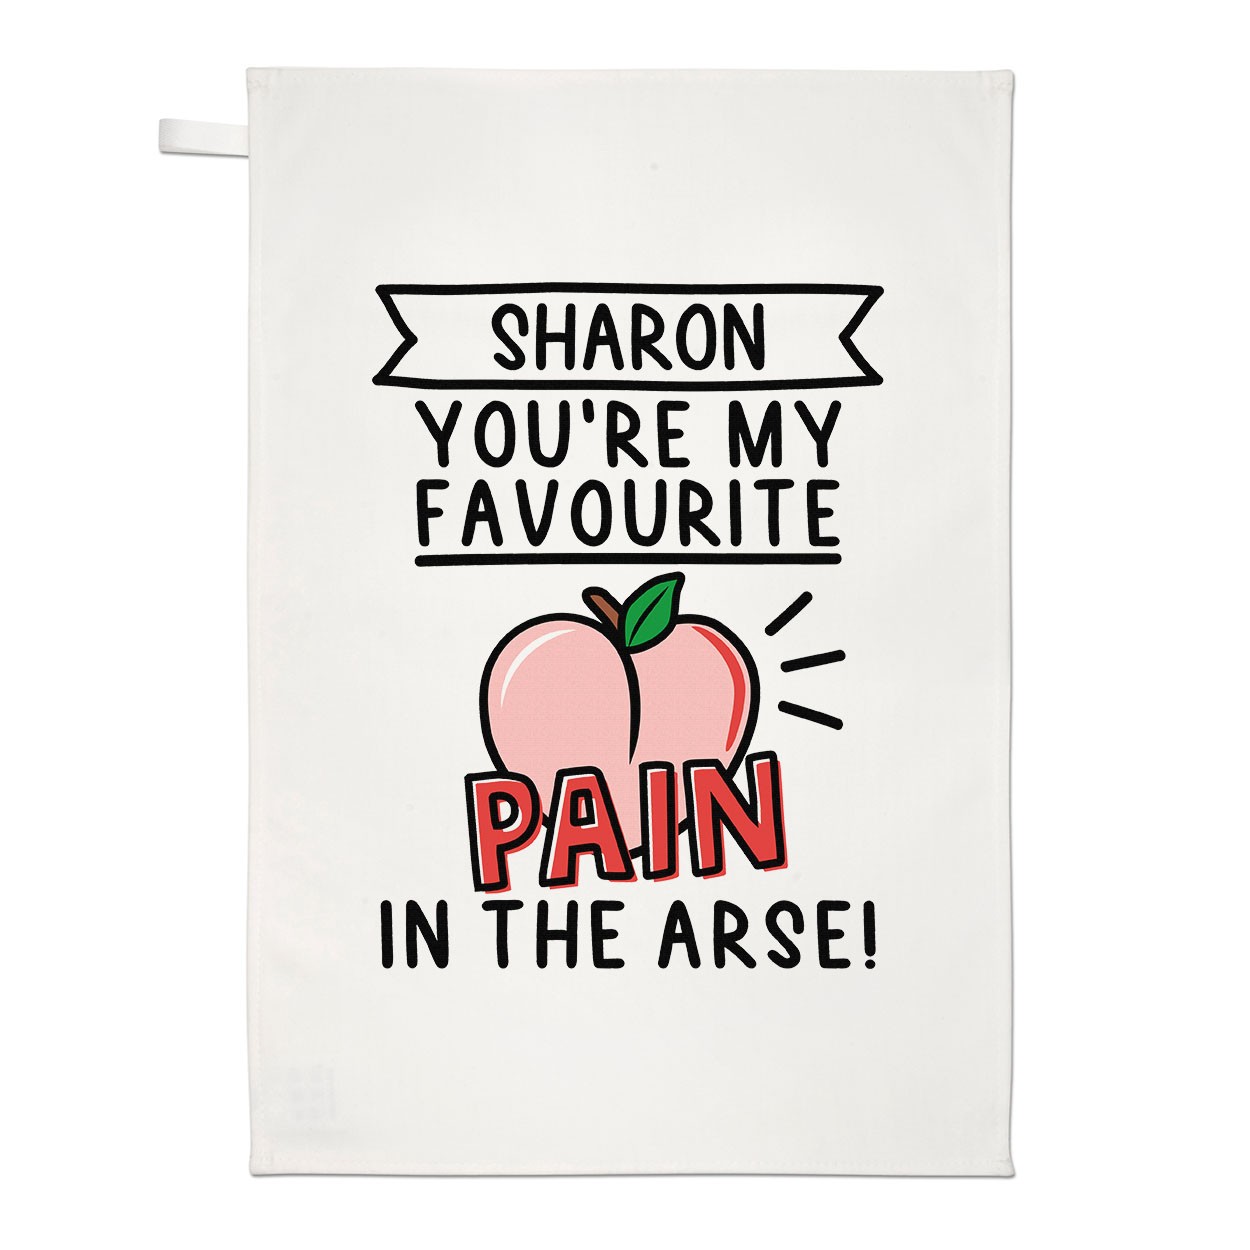 Personalised You're My Favourite Pain In The Arse Tea Towel Dish Cloth